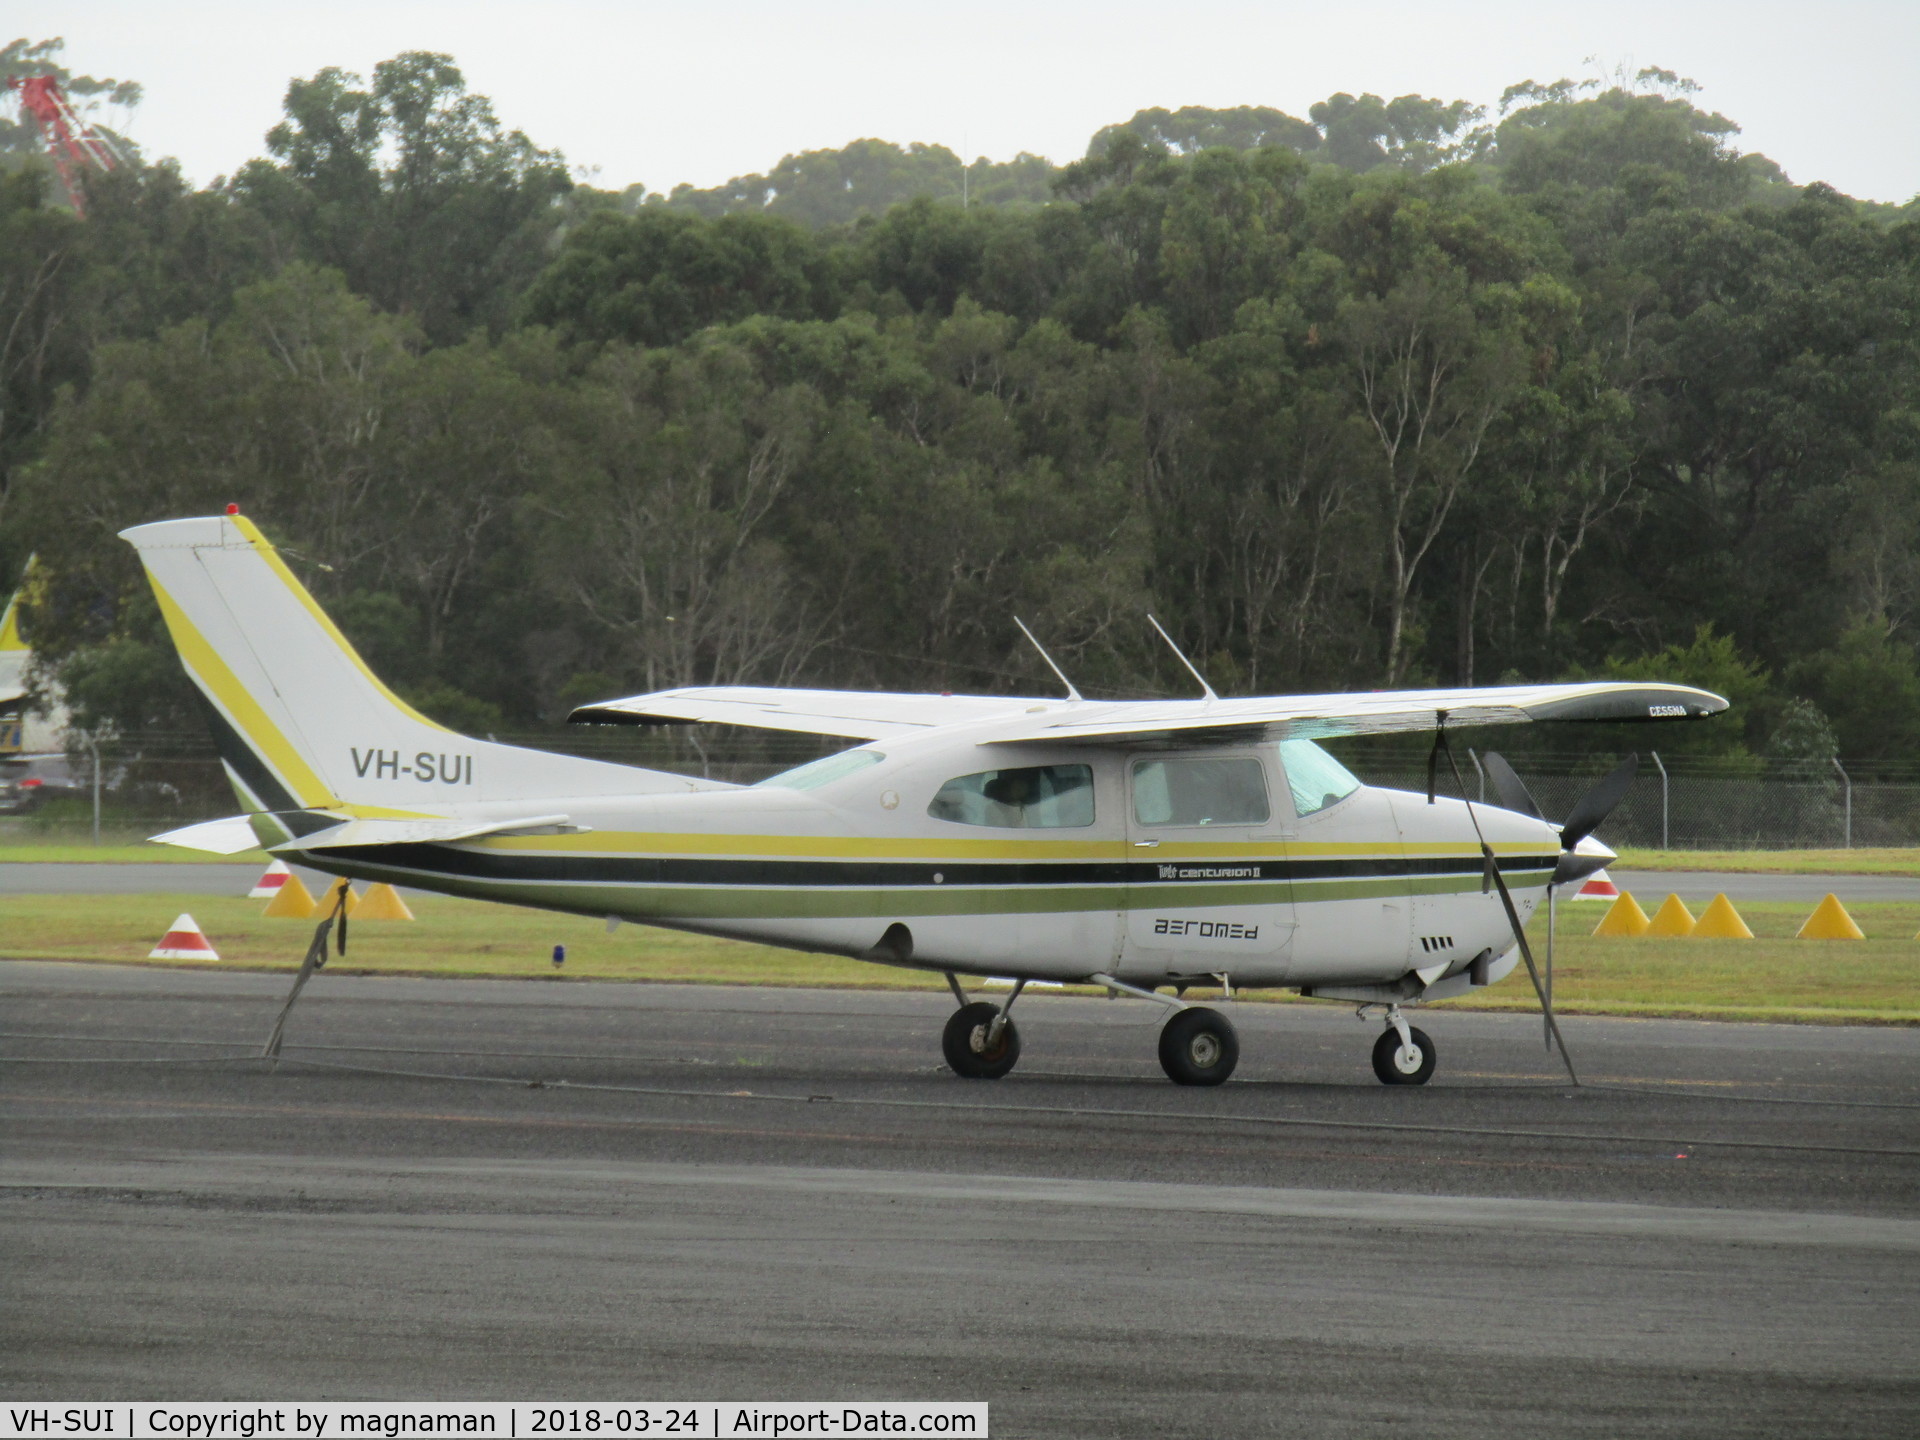 VH-SUI, Cessna T210N Turbo Centurion C/N 21063435, on apron in damp at caloundra